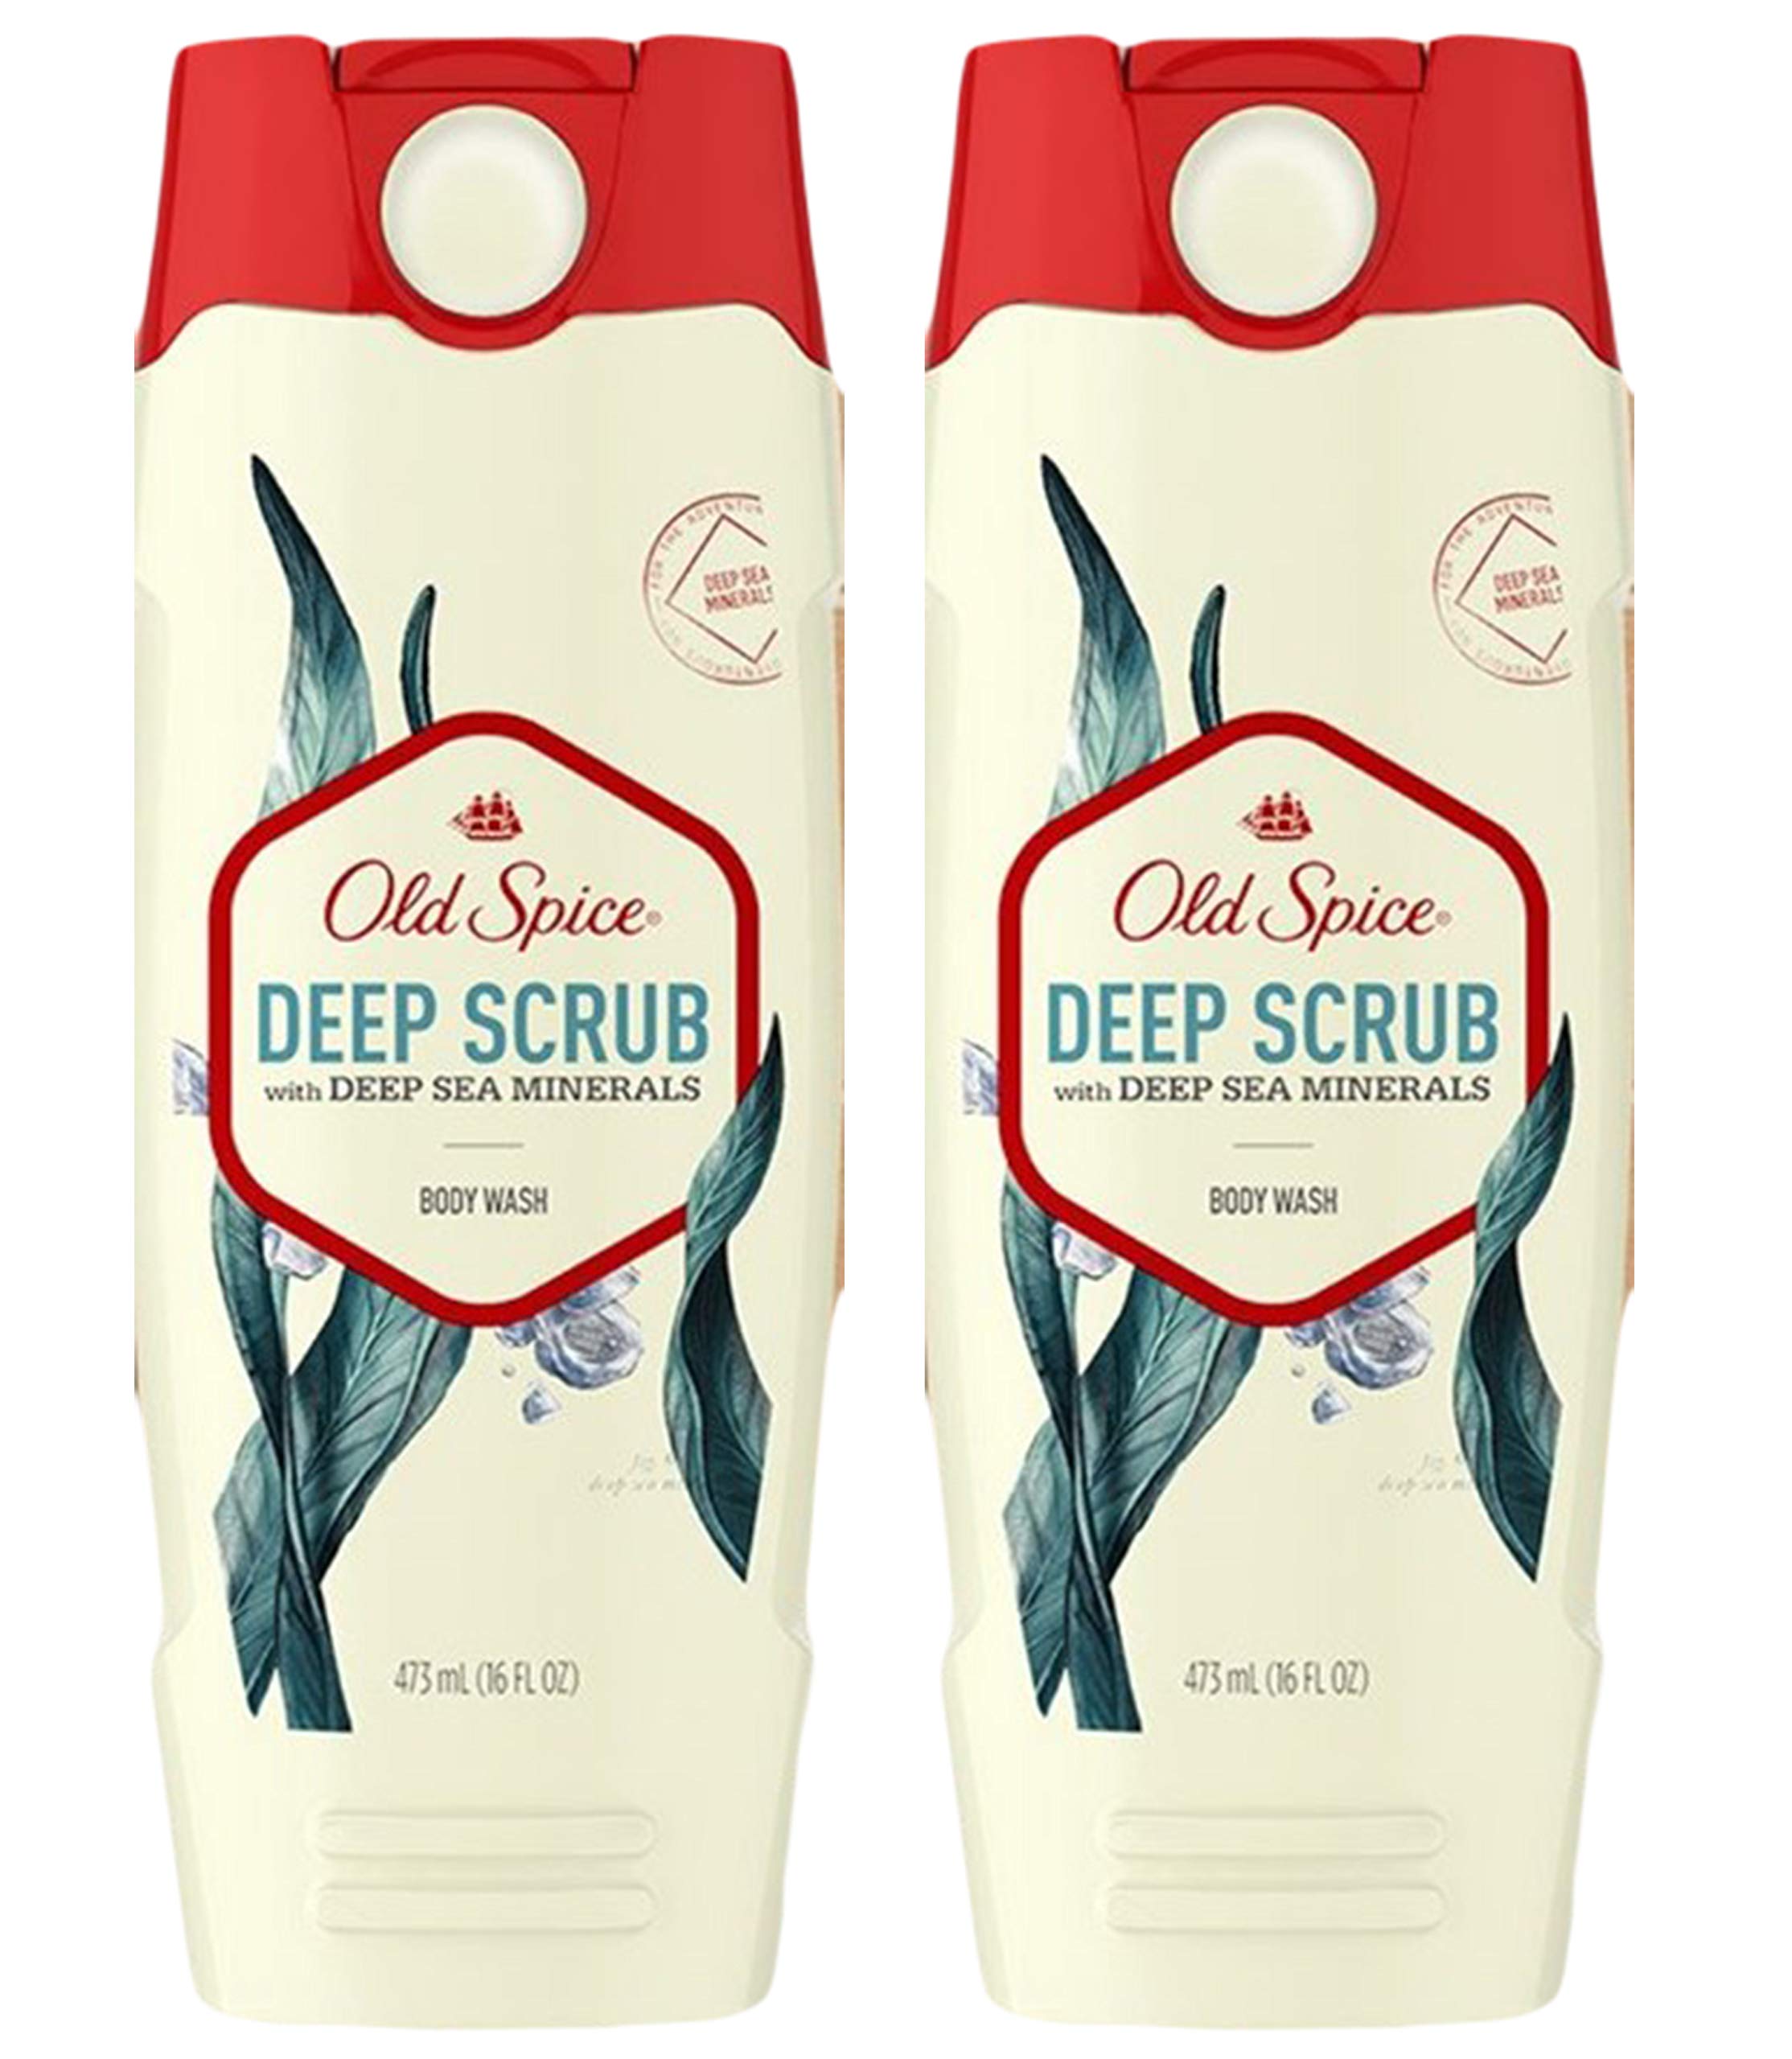 Proctor & Gamble Old Spice Mens Body Wash Deep Scrub with Sea Minerals 16 Ounce (473ml) (2 Pack)